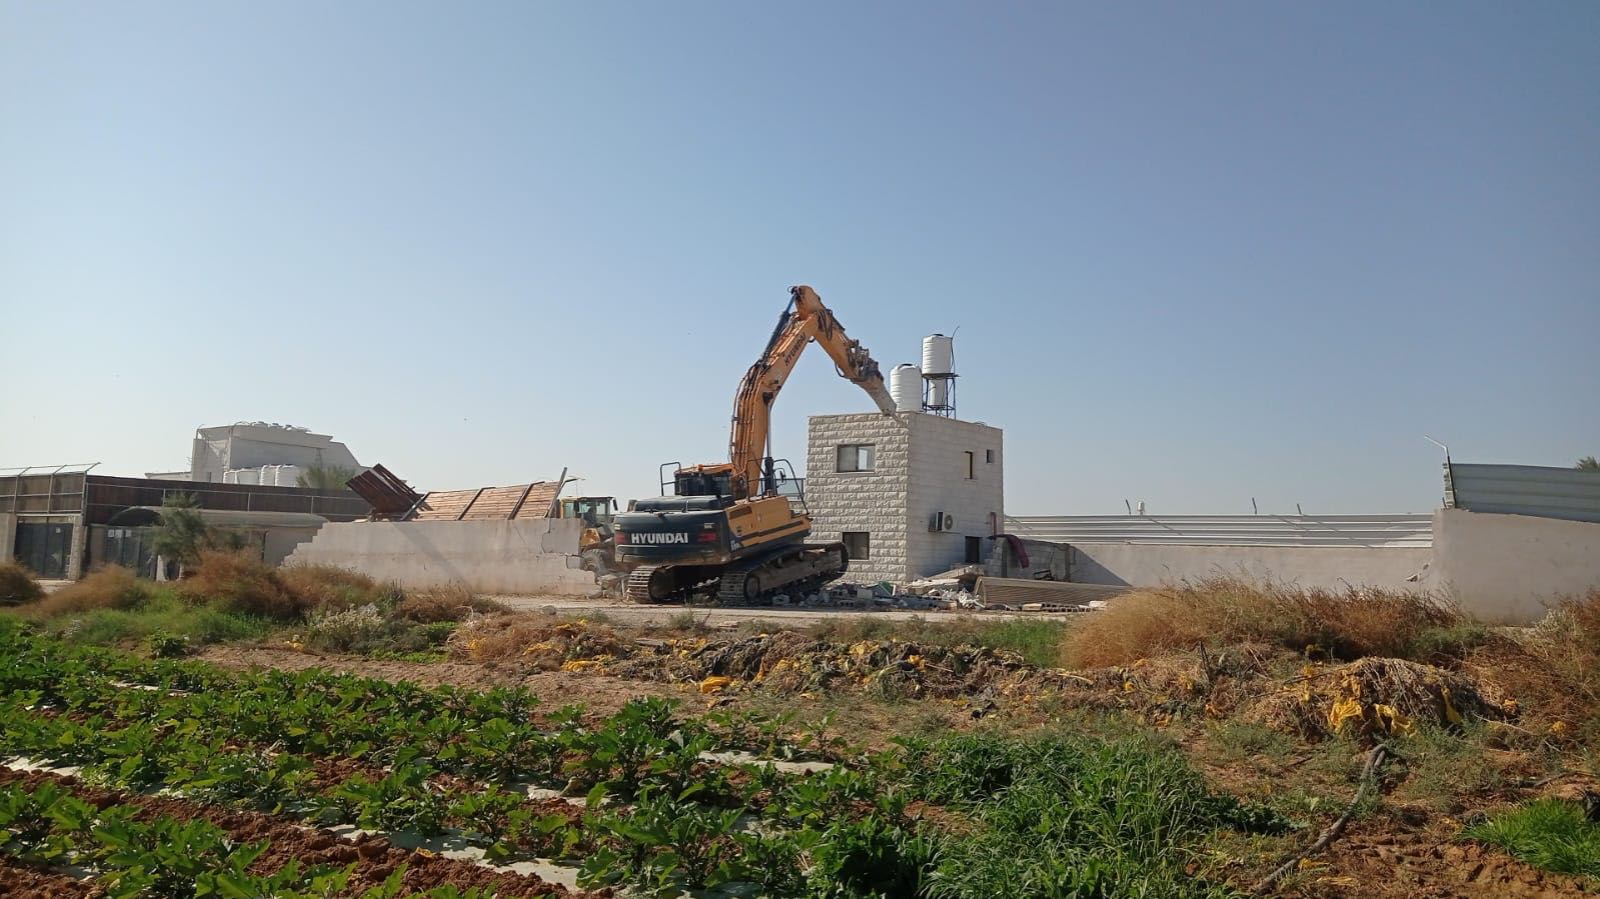 19 December 2022: Israeli Civil administration along with the Israeli forces demolished five structures in Area C in Jericho ©Ph